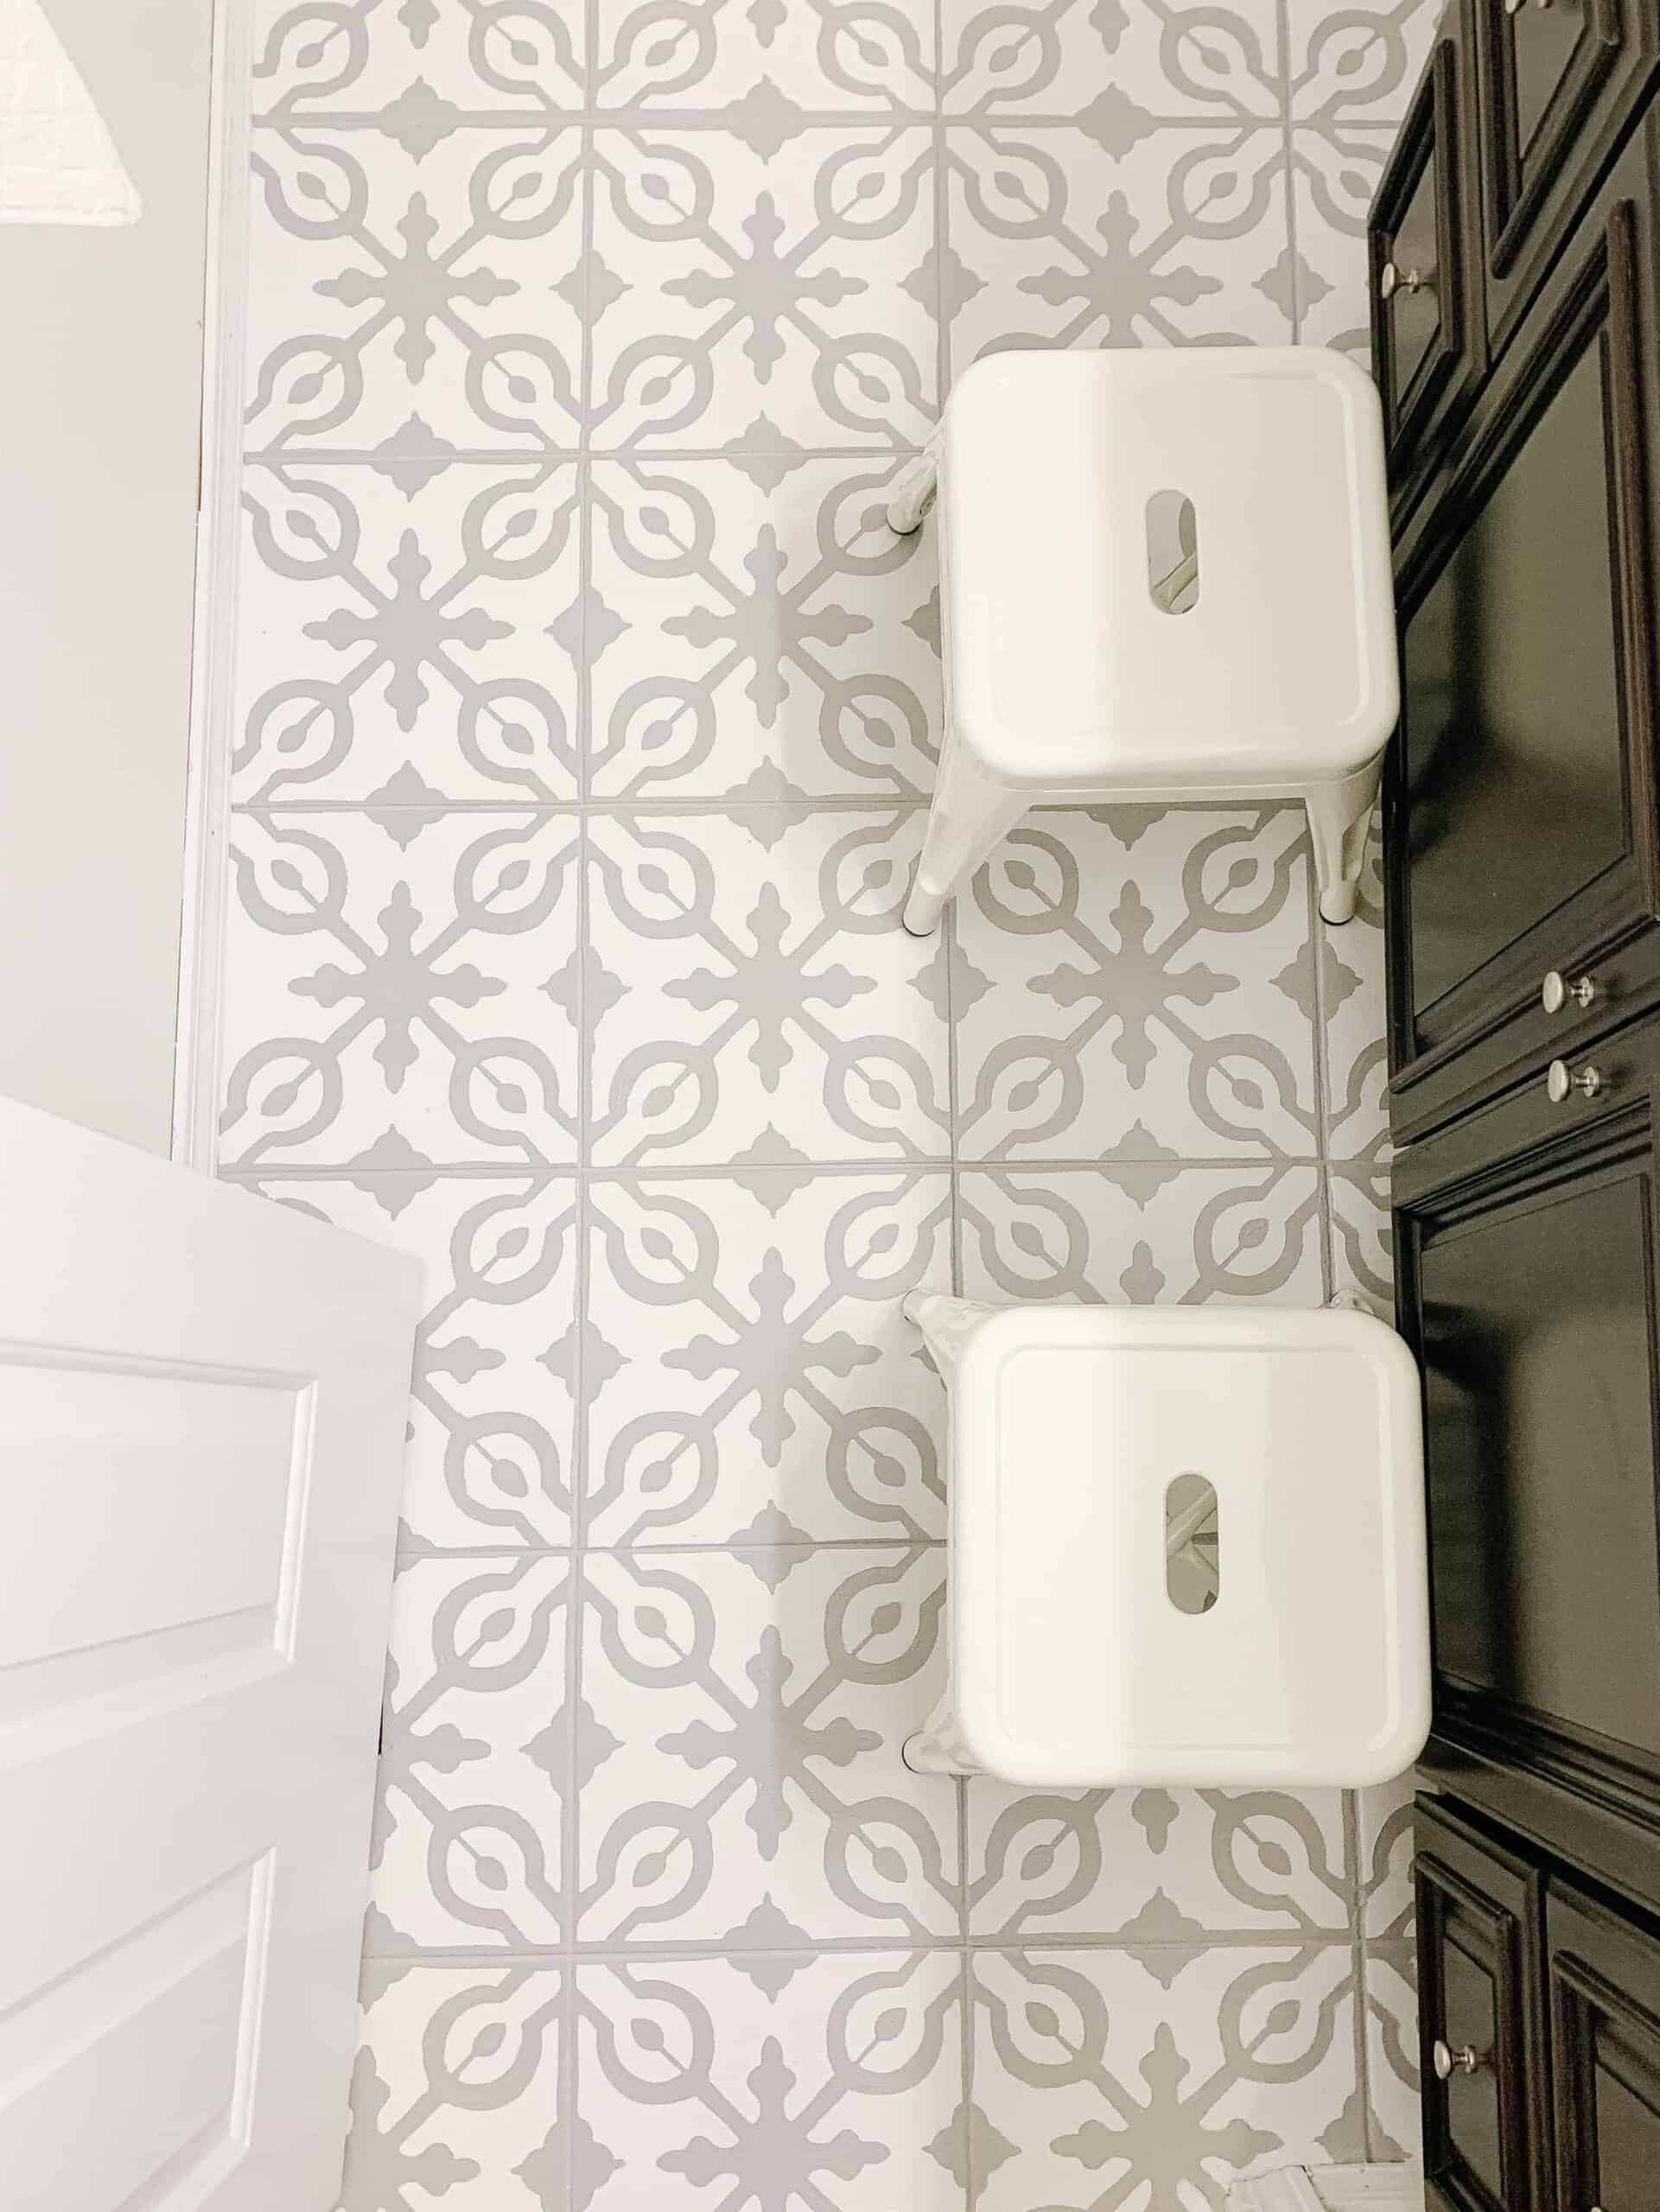 painted tile floors with small white metal stools